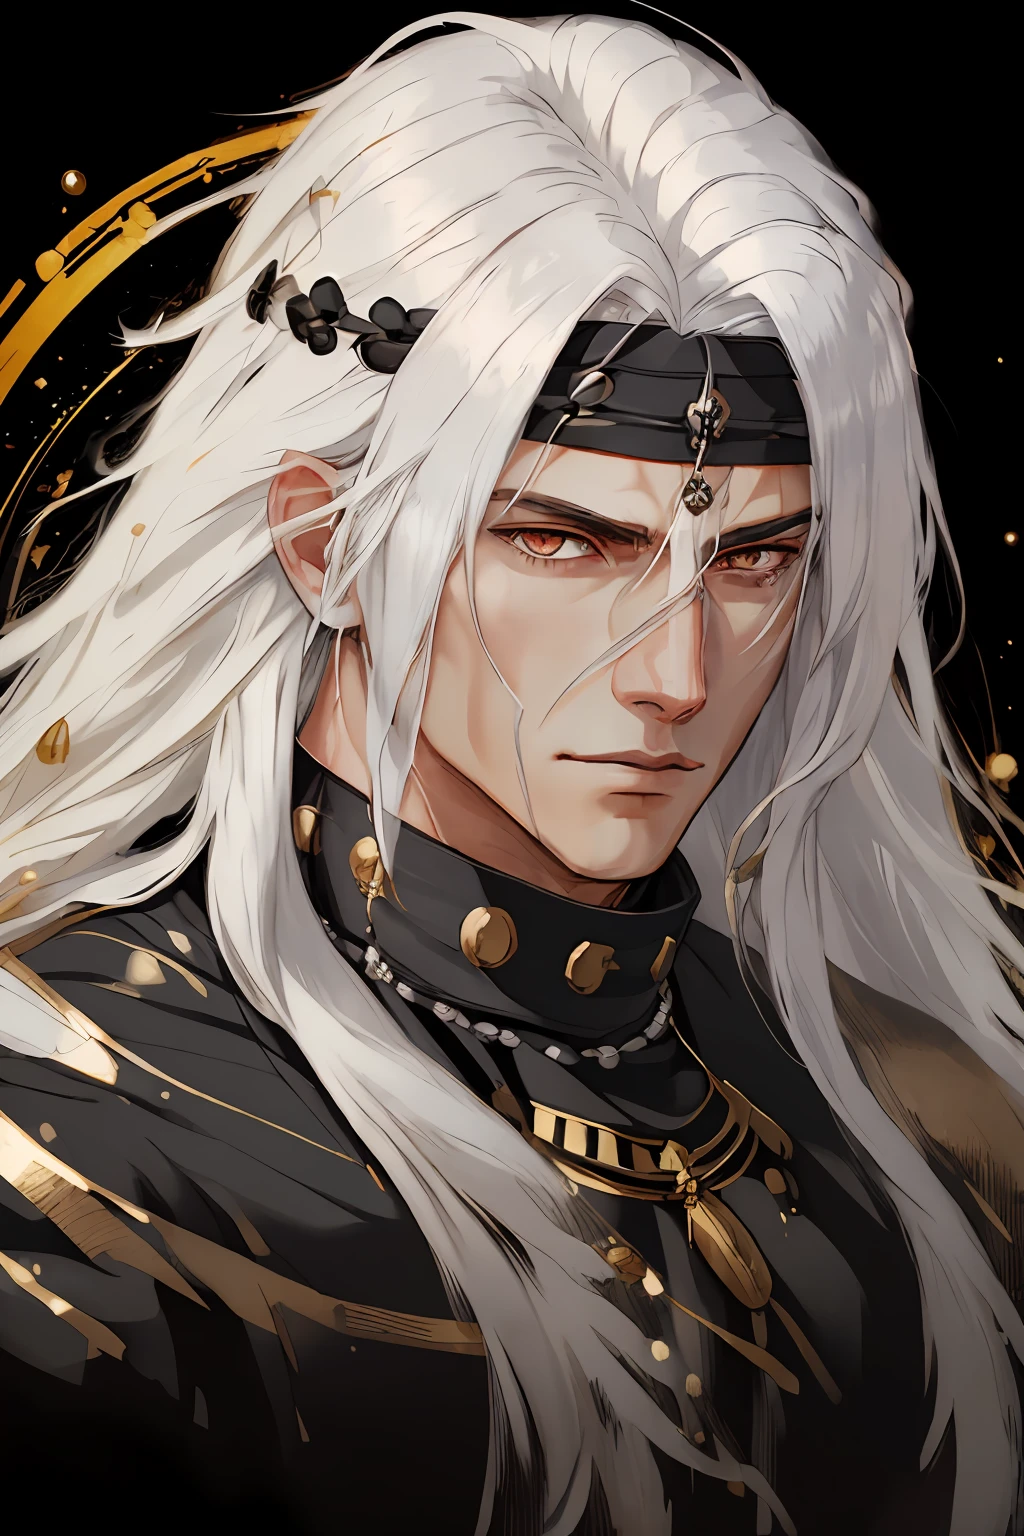 "Best quality, masterpiece, 1 boy with long white hair, white eyes, wearing a black beaded necklace, smug face, shirtless showing his muscles, adorned with a gold gauntlet, set against a portrait-style composition with an abstract background."